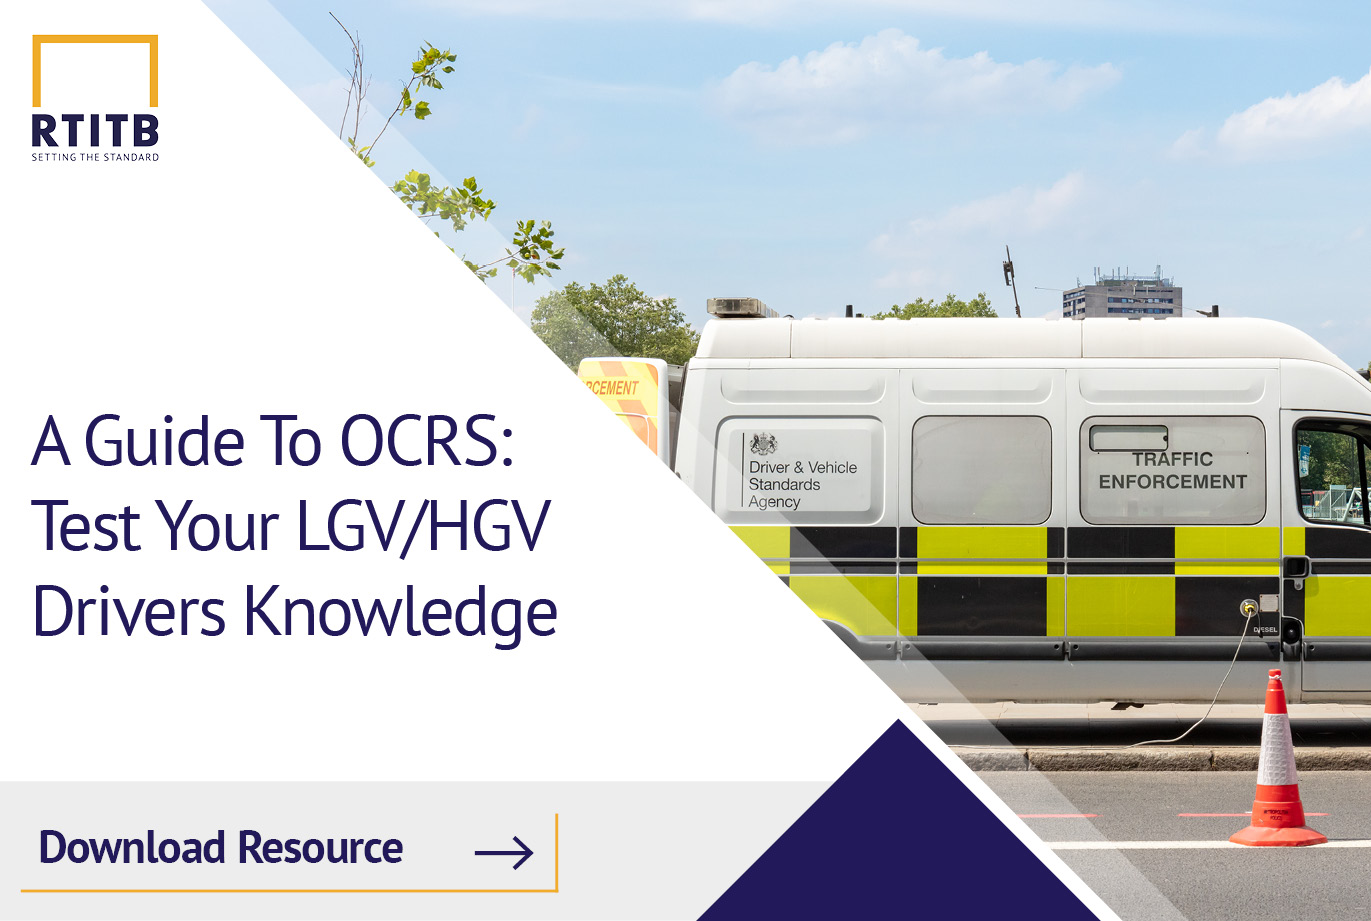 A guide to OCRS: Test your LGV/HGV drivers knowledge